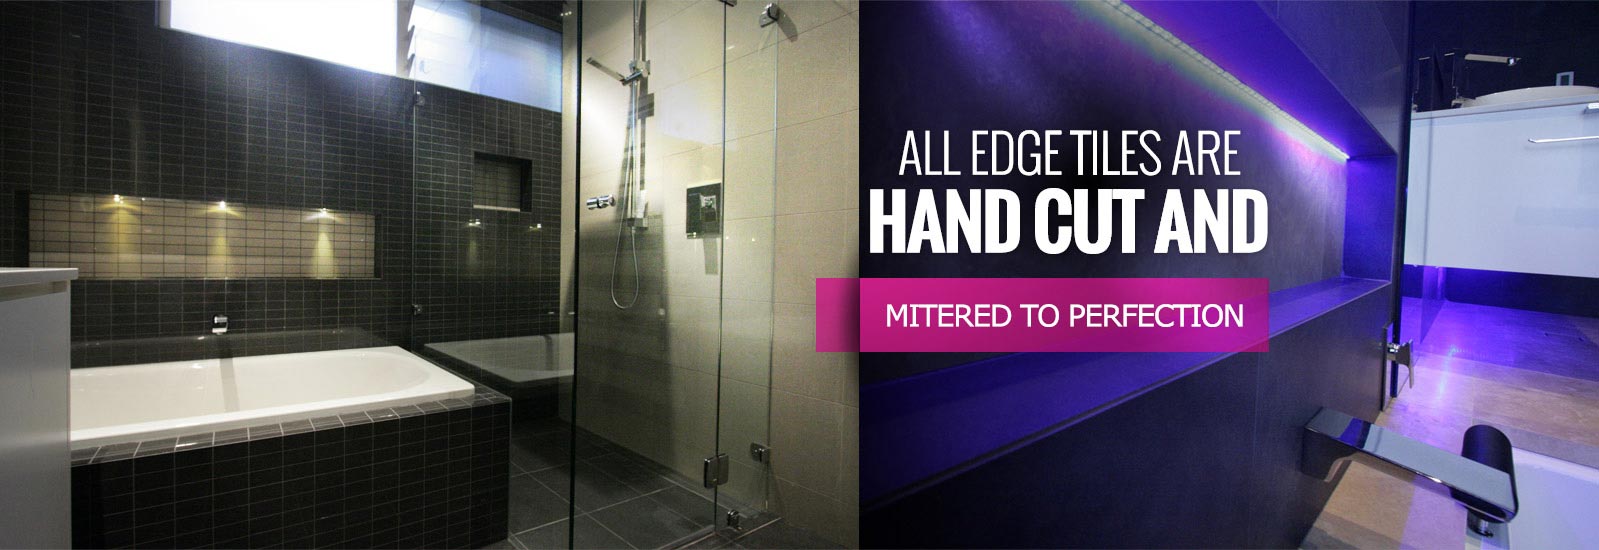 All edge tiles are hand cut and metered to perfection